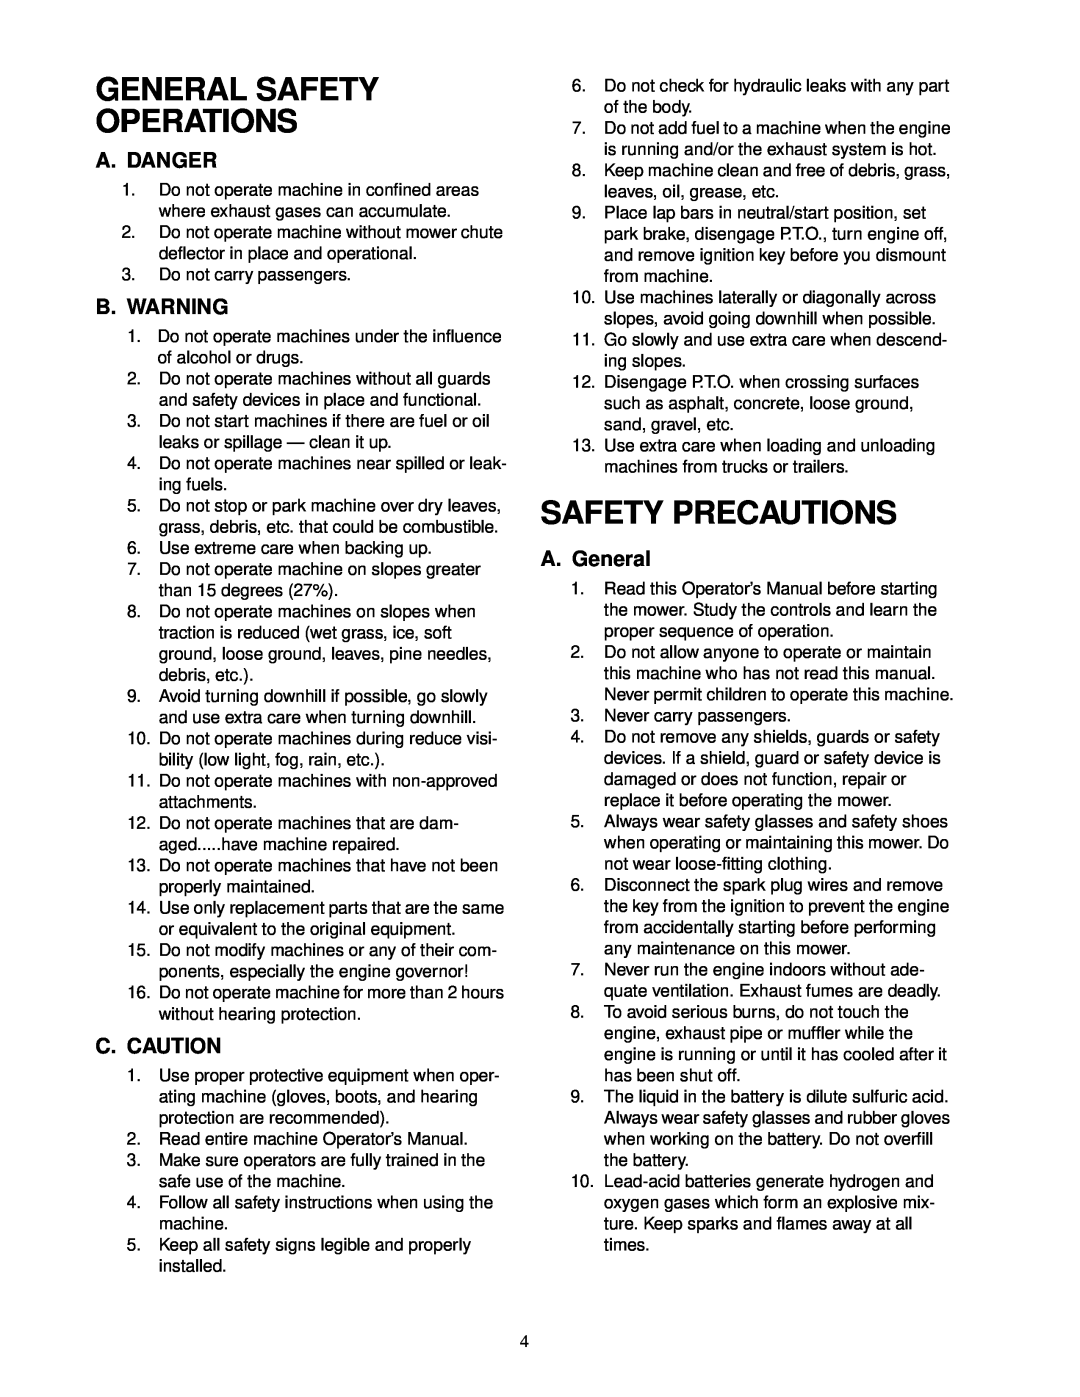 Cub Cadet service manual General Safety Operations, Safety Precautions, A. Danger, B. Warning, C. Caution, A. General 